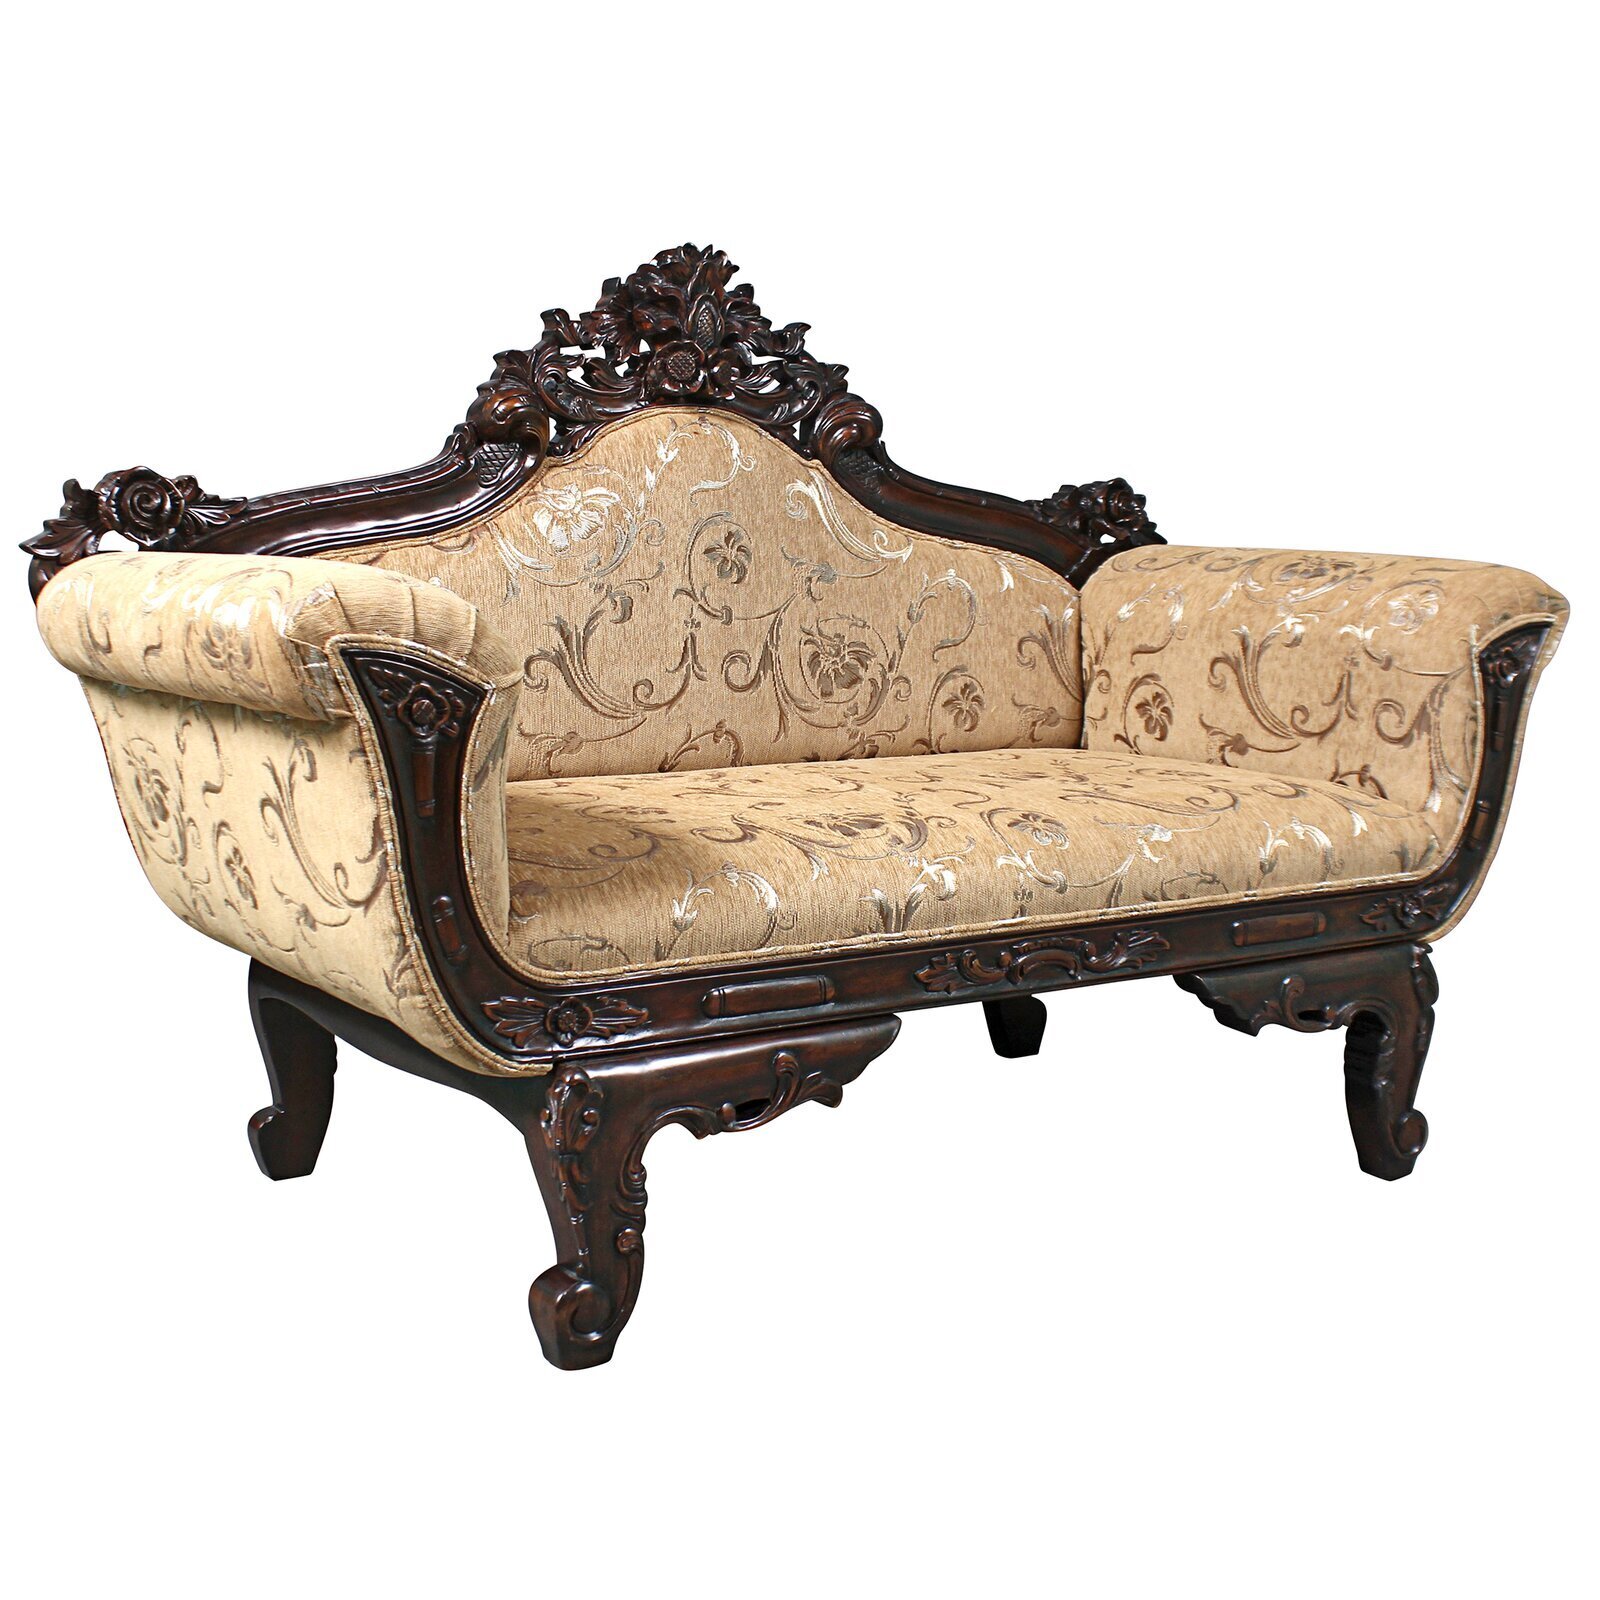 Antique Victorian Styled Camel Back Sofa 